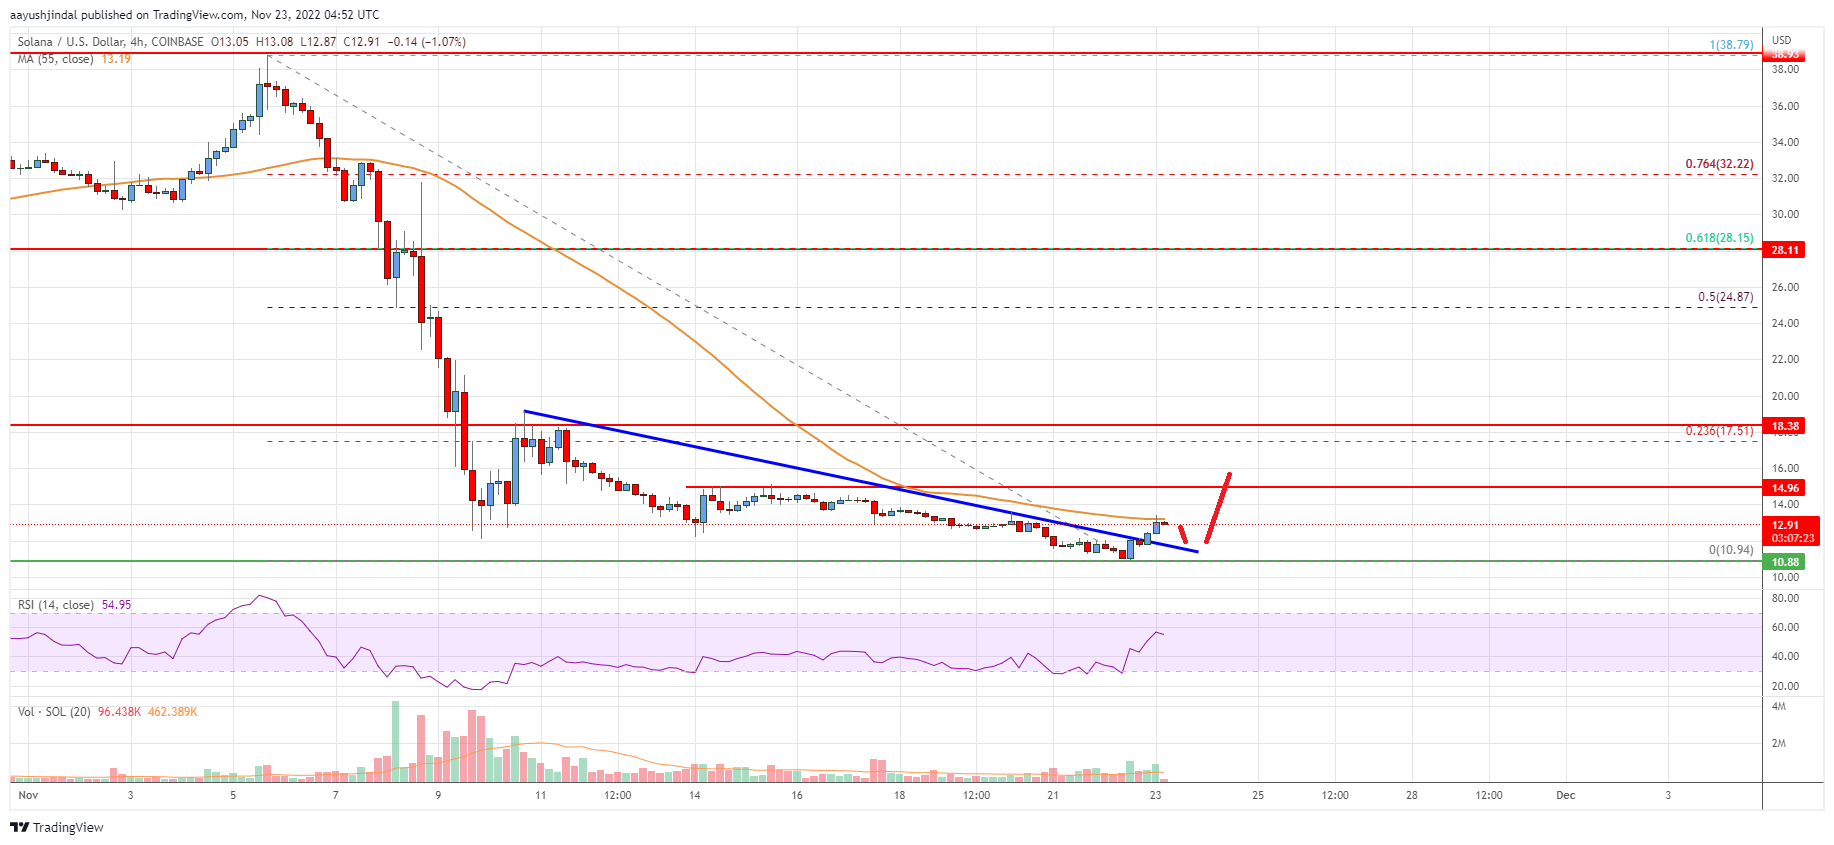 Solana (SOL) Price Analysis: Short-term Recovery Possible From $11